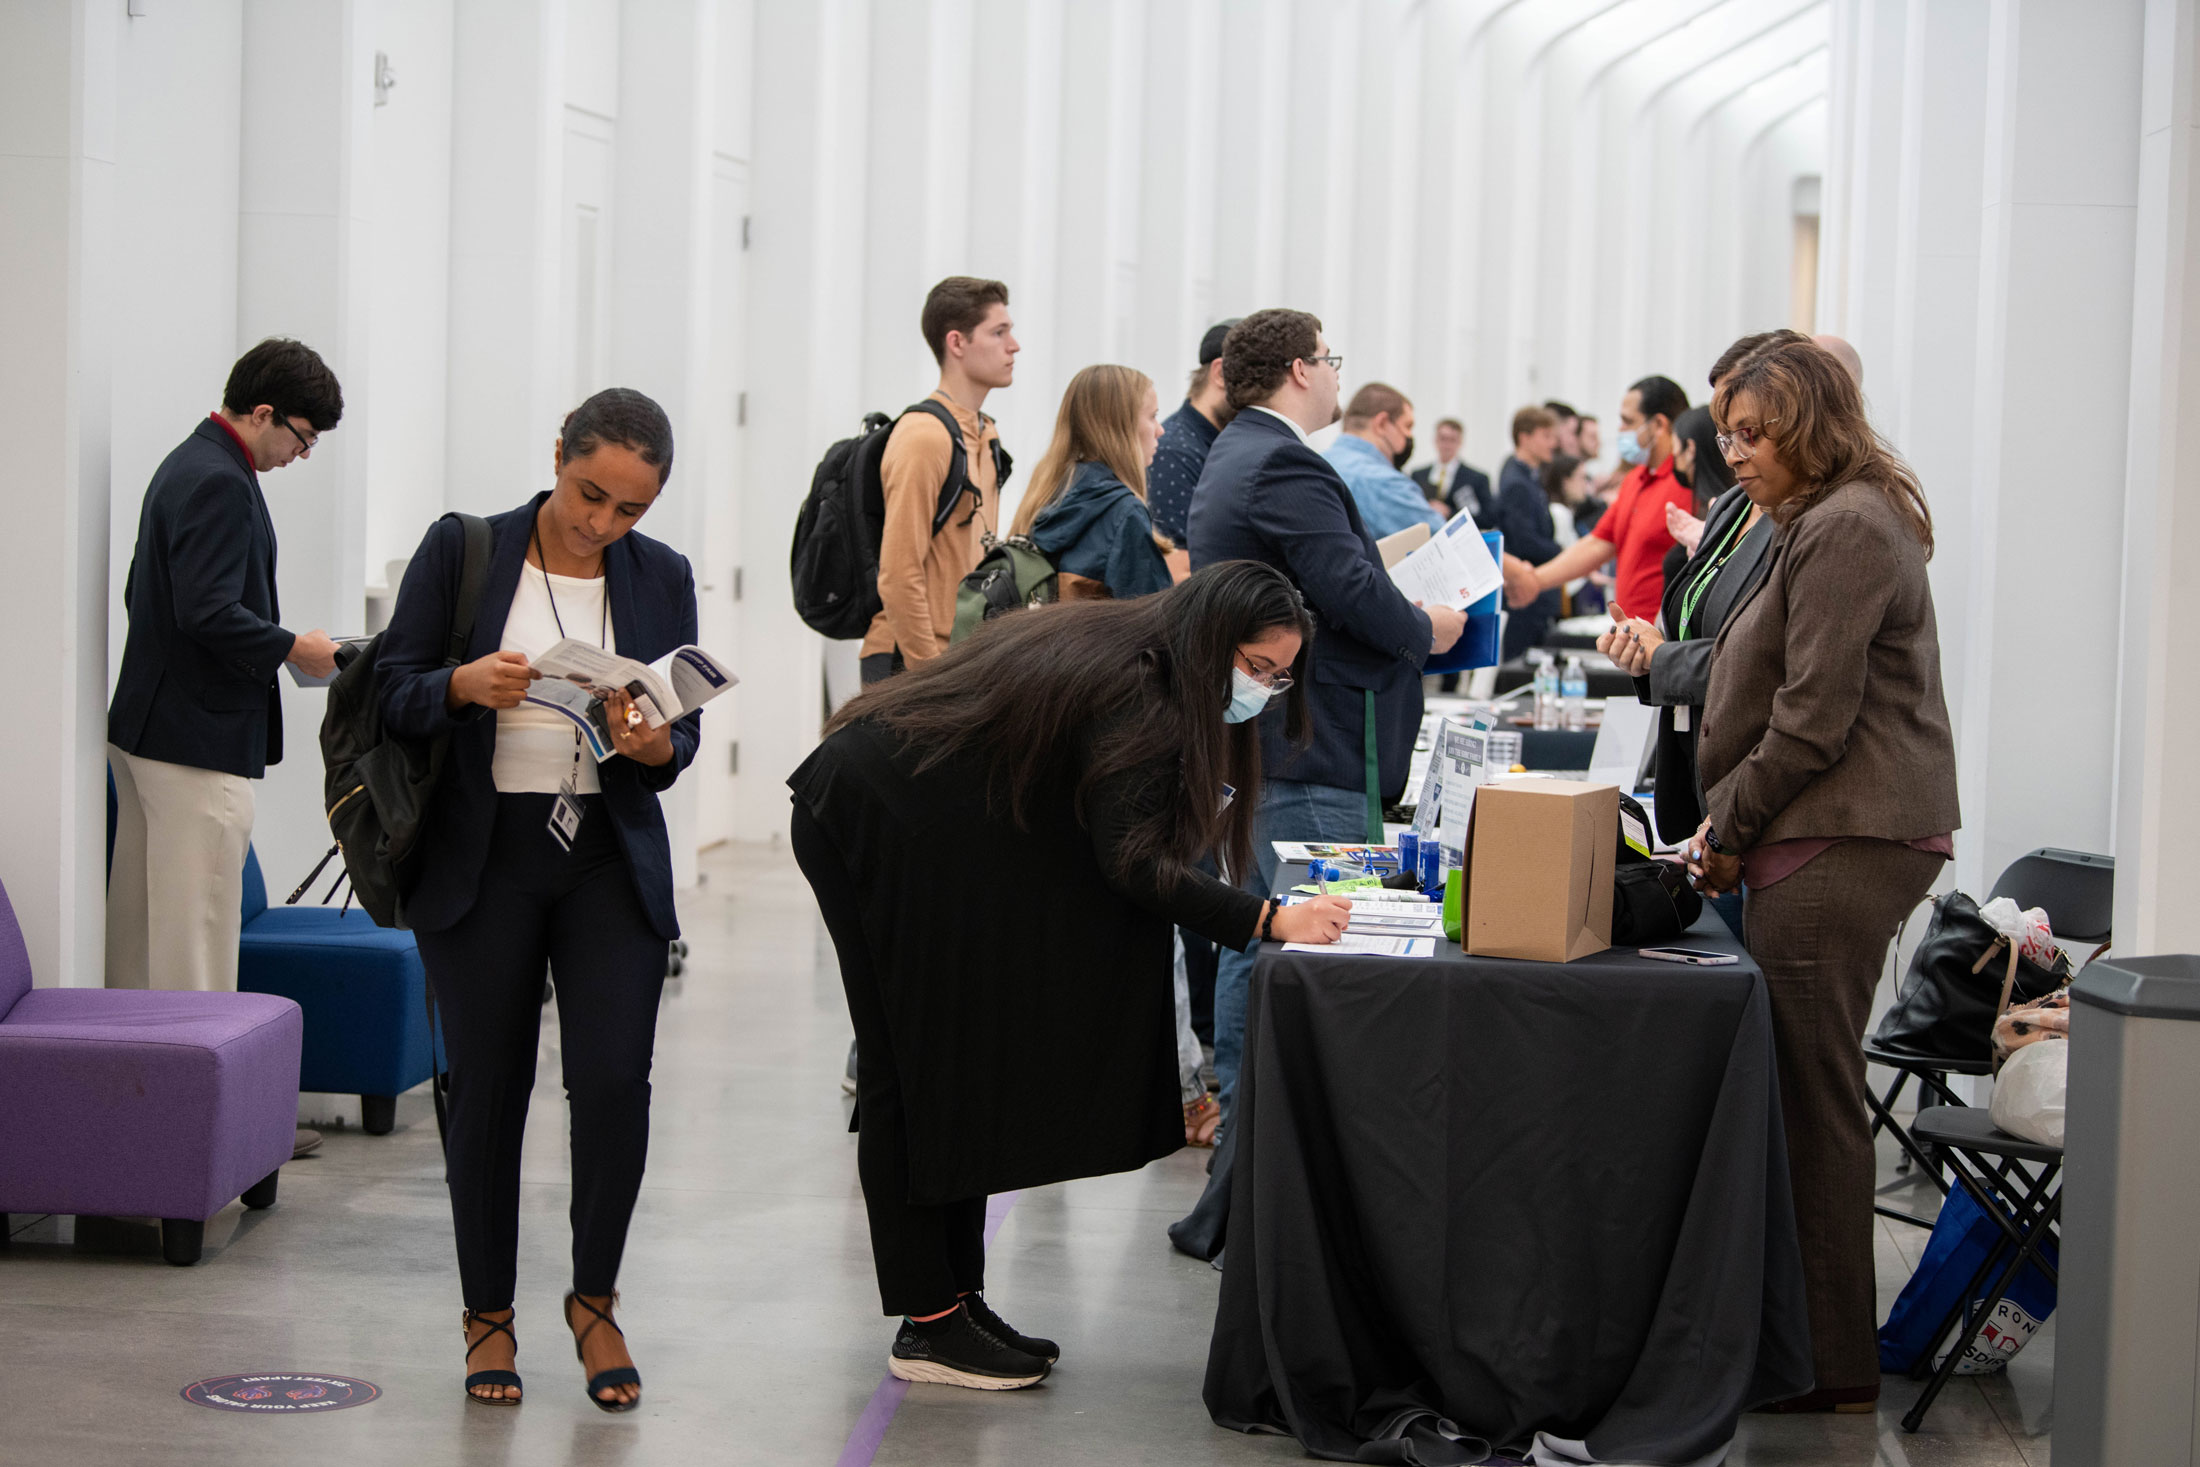 Students attend the Spring 2022 Career and Internship Fair